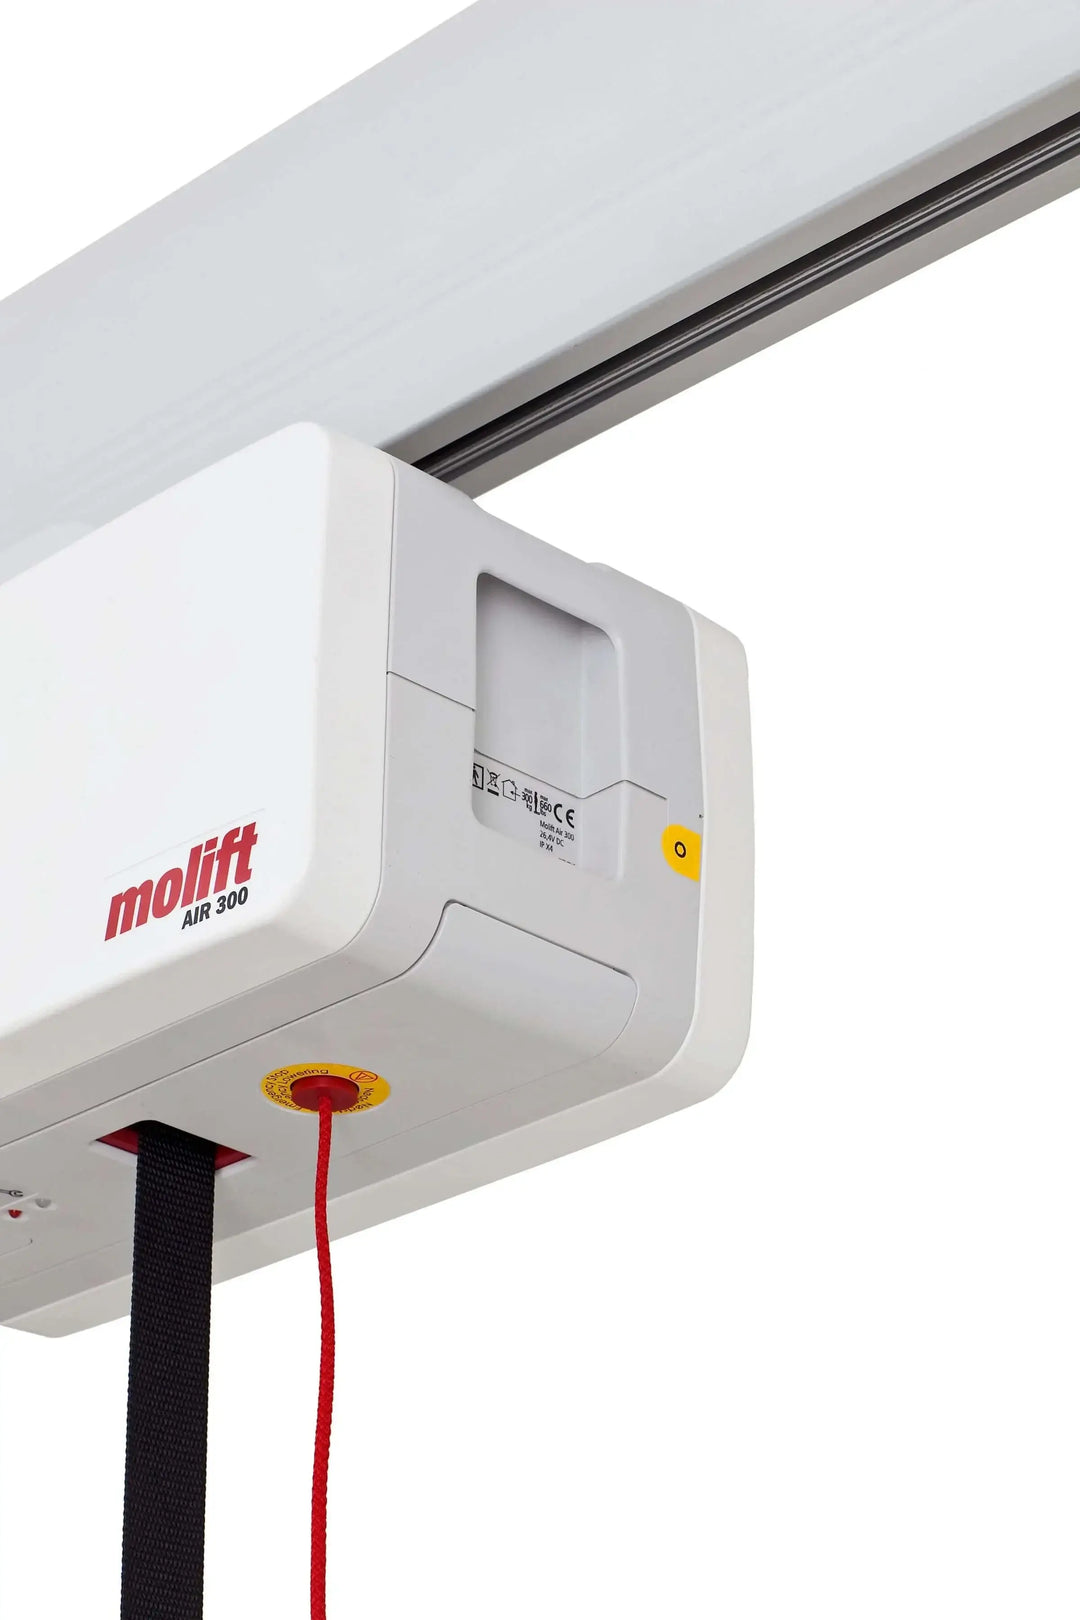 Molift Air 300 Ceiling Lift Motor Reliable Ramps 